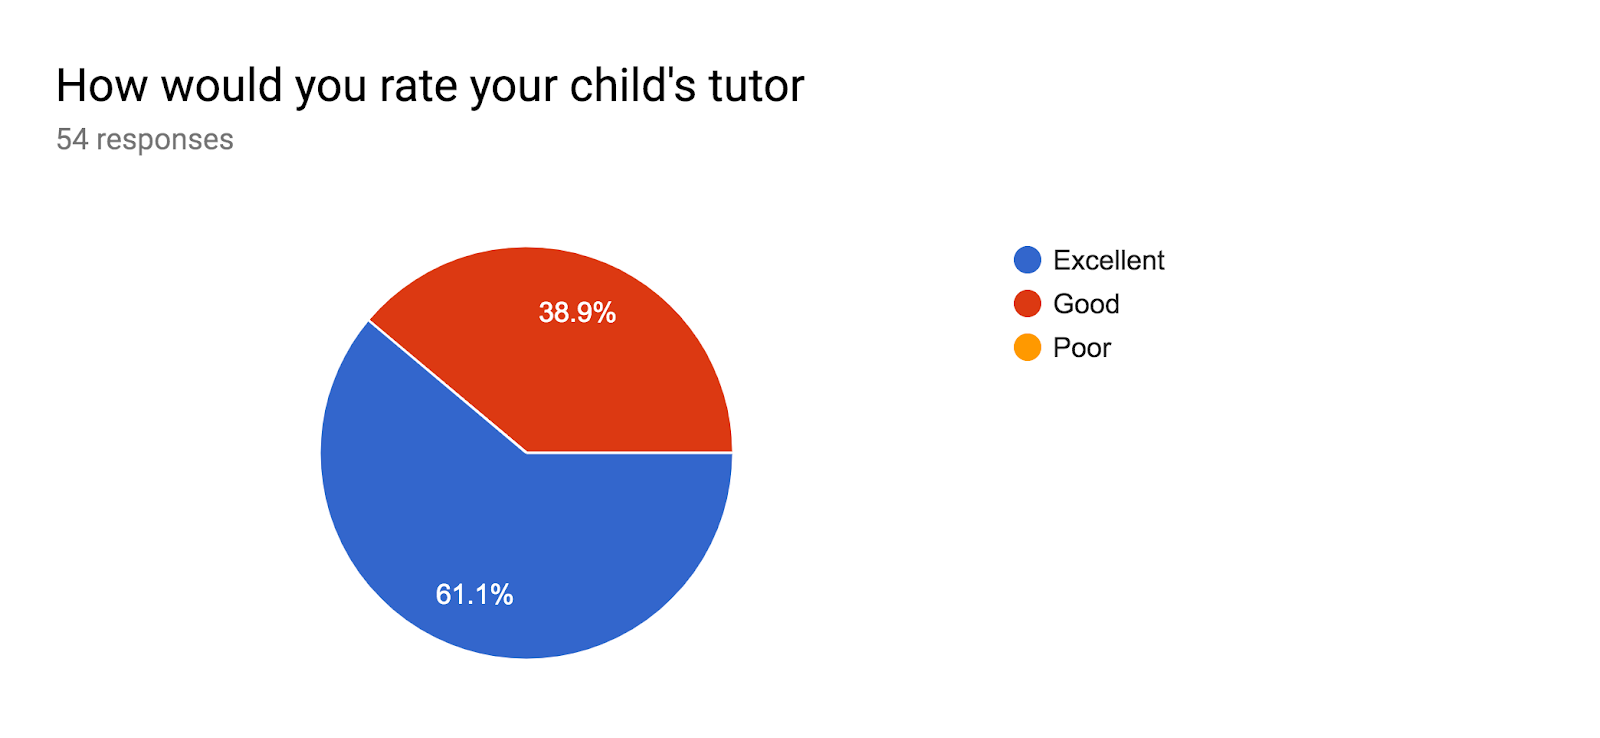 Forms response chart. Question title: How would you rate your child's tutor. Number of responses: 54 responses.